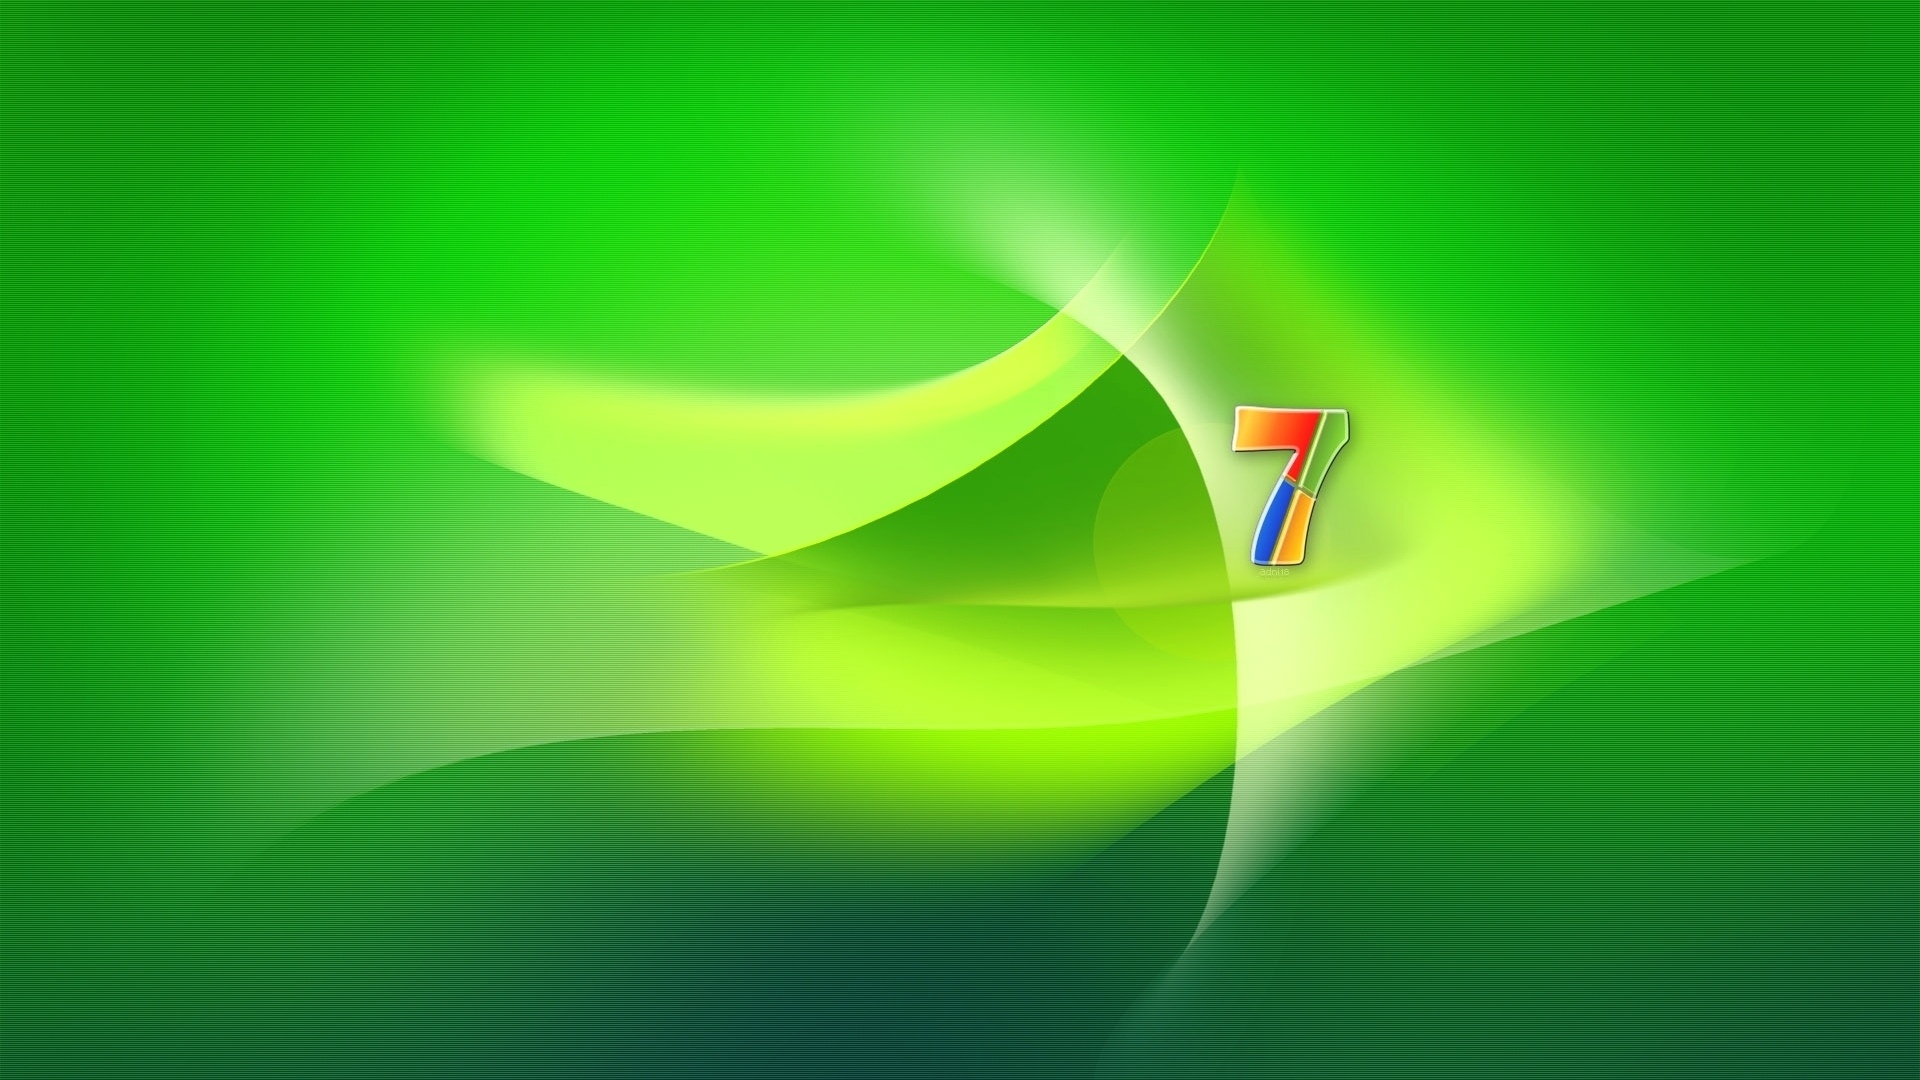 General 1920x1080 Microsoft Windows Windows 7 green shapes numbers green background